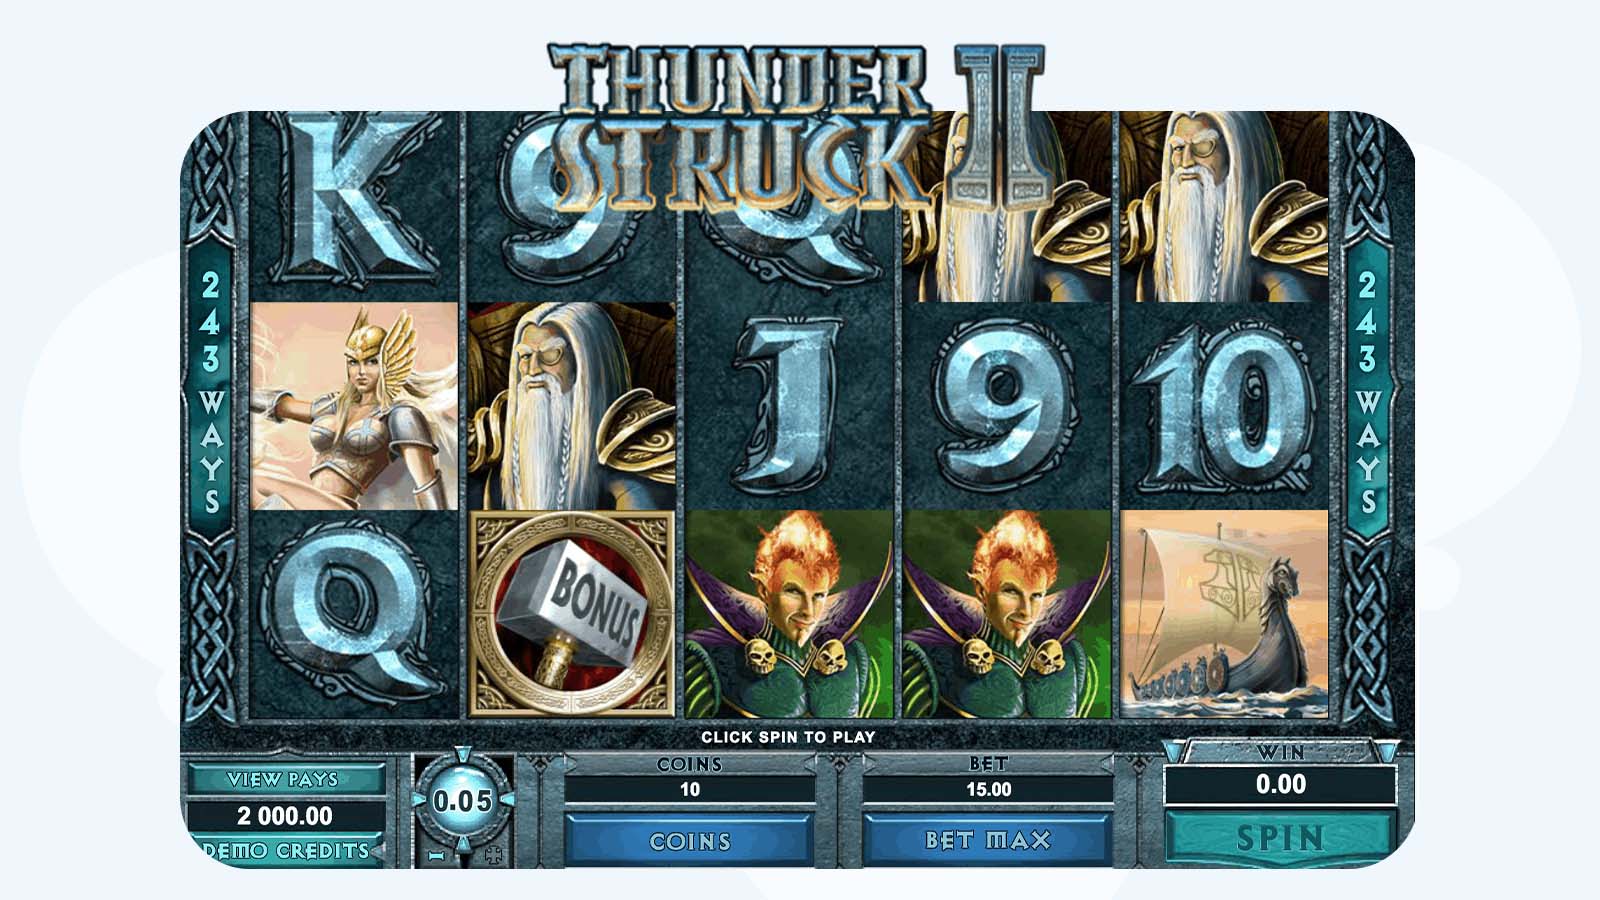 Thunderstruck II: Why It’s One of the Top Online Pokies